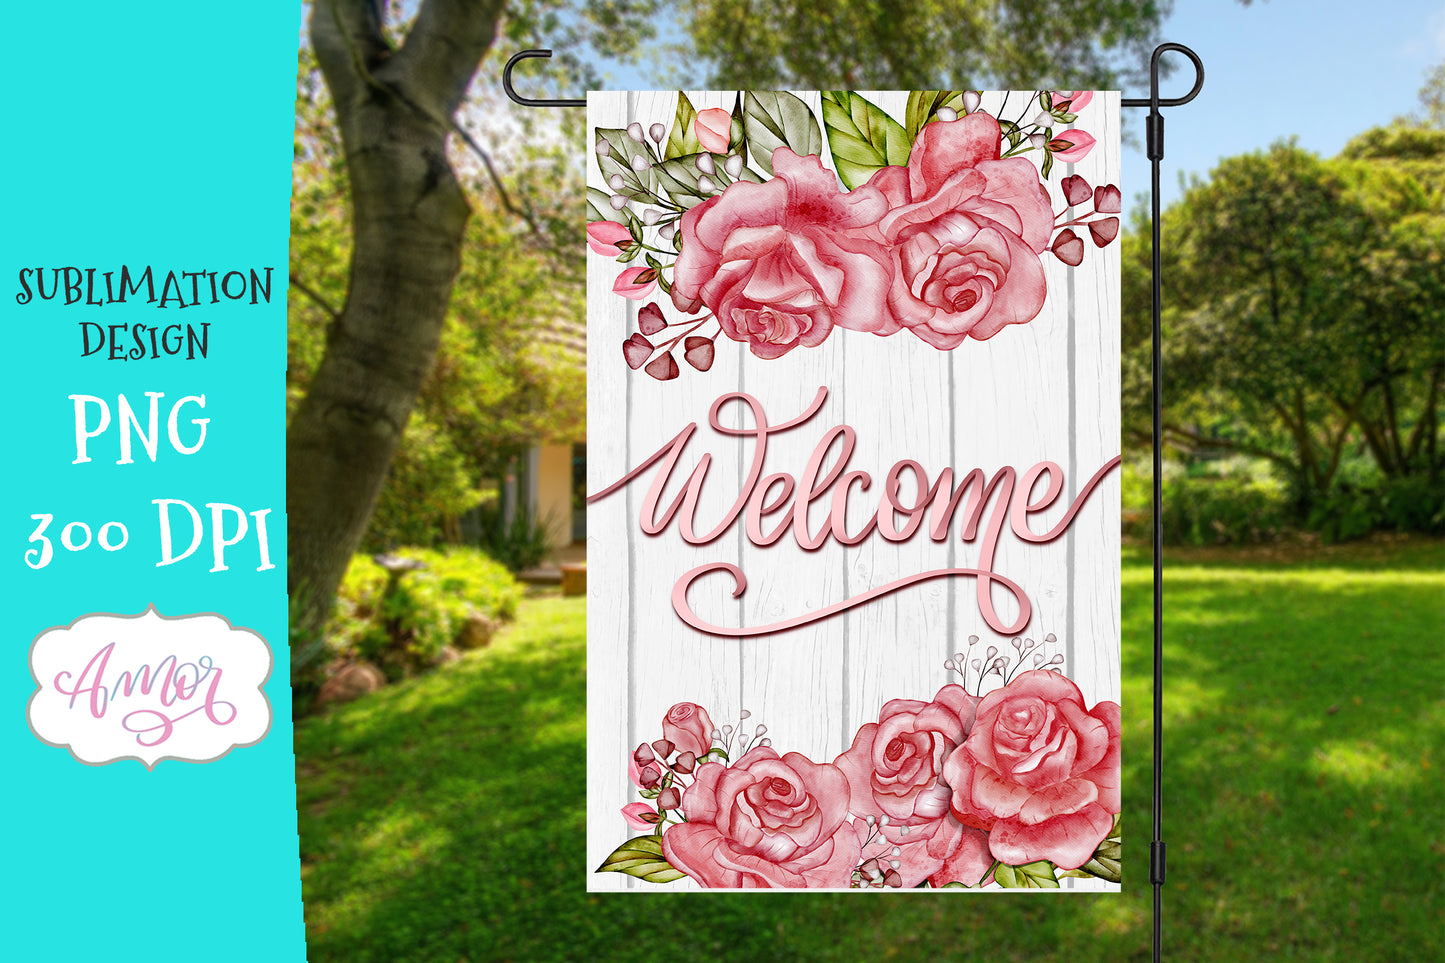 Welcome Garden Flag Sublimation Design with rose flowers